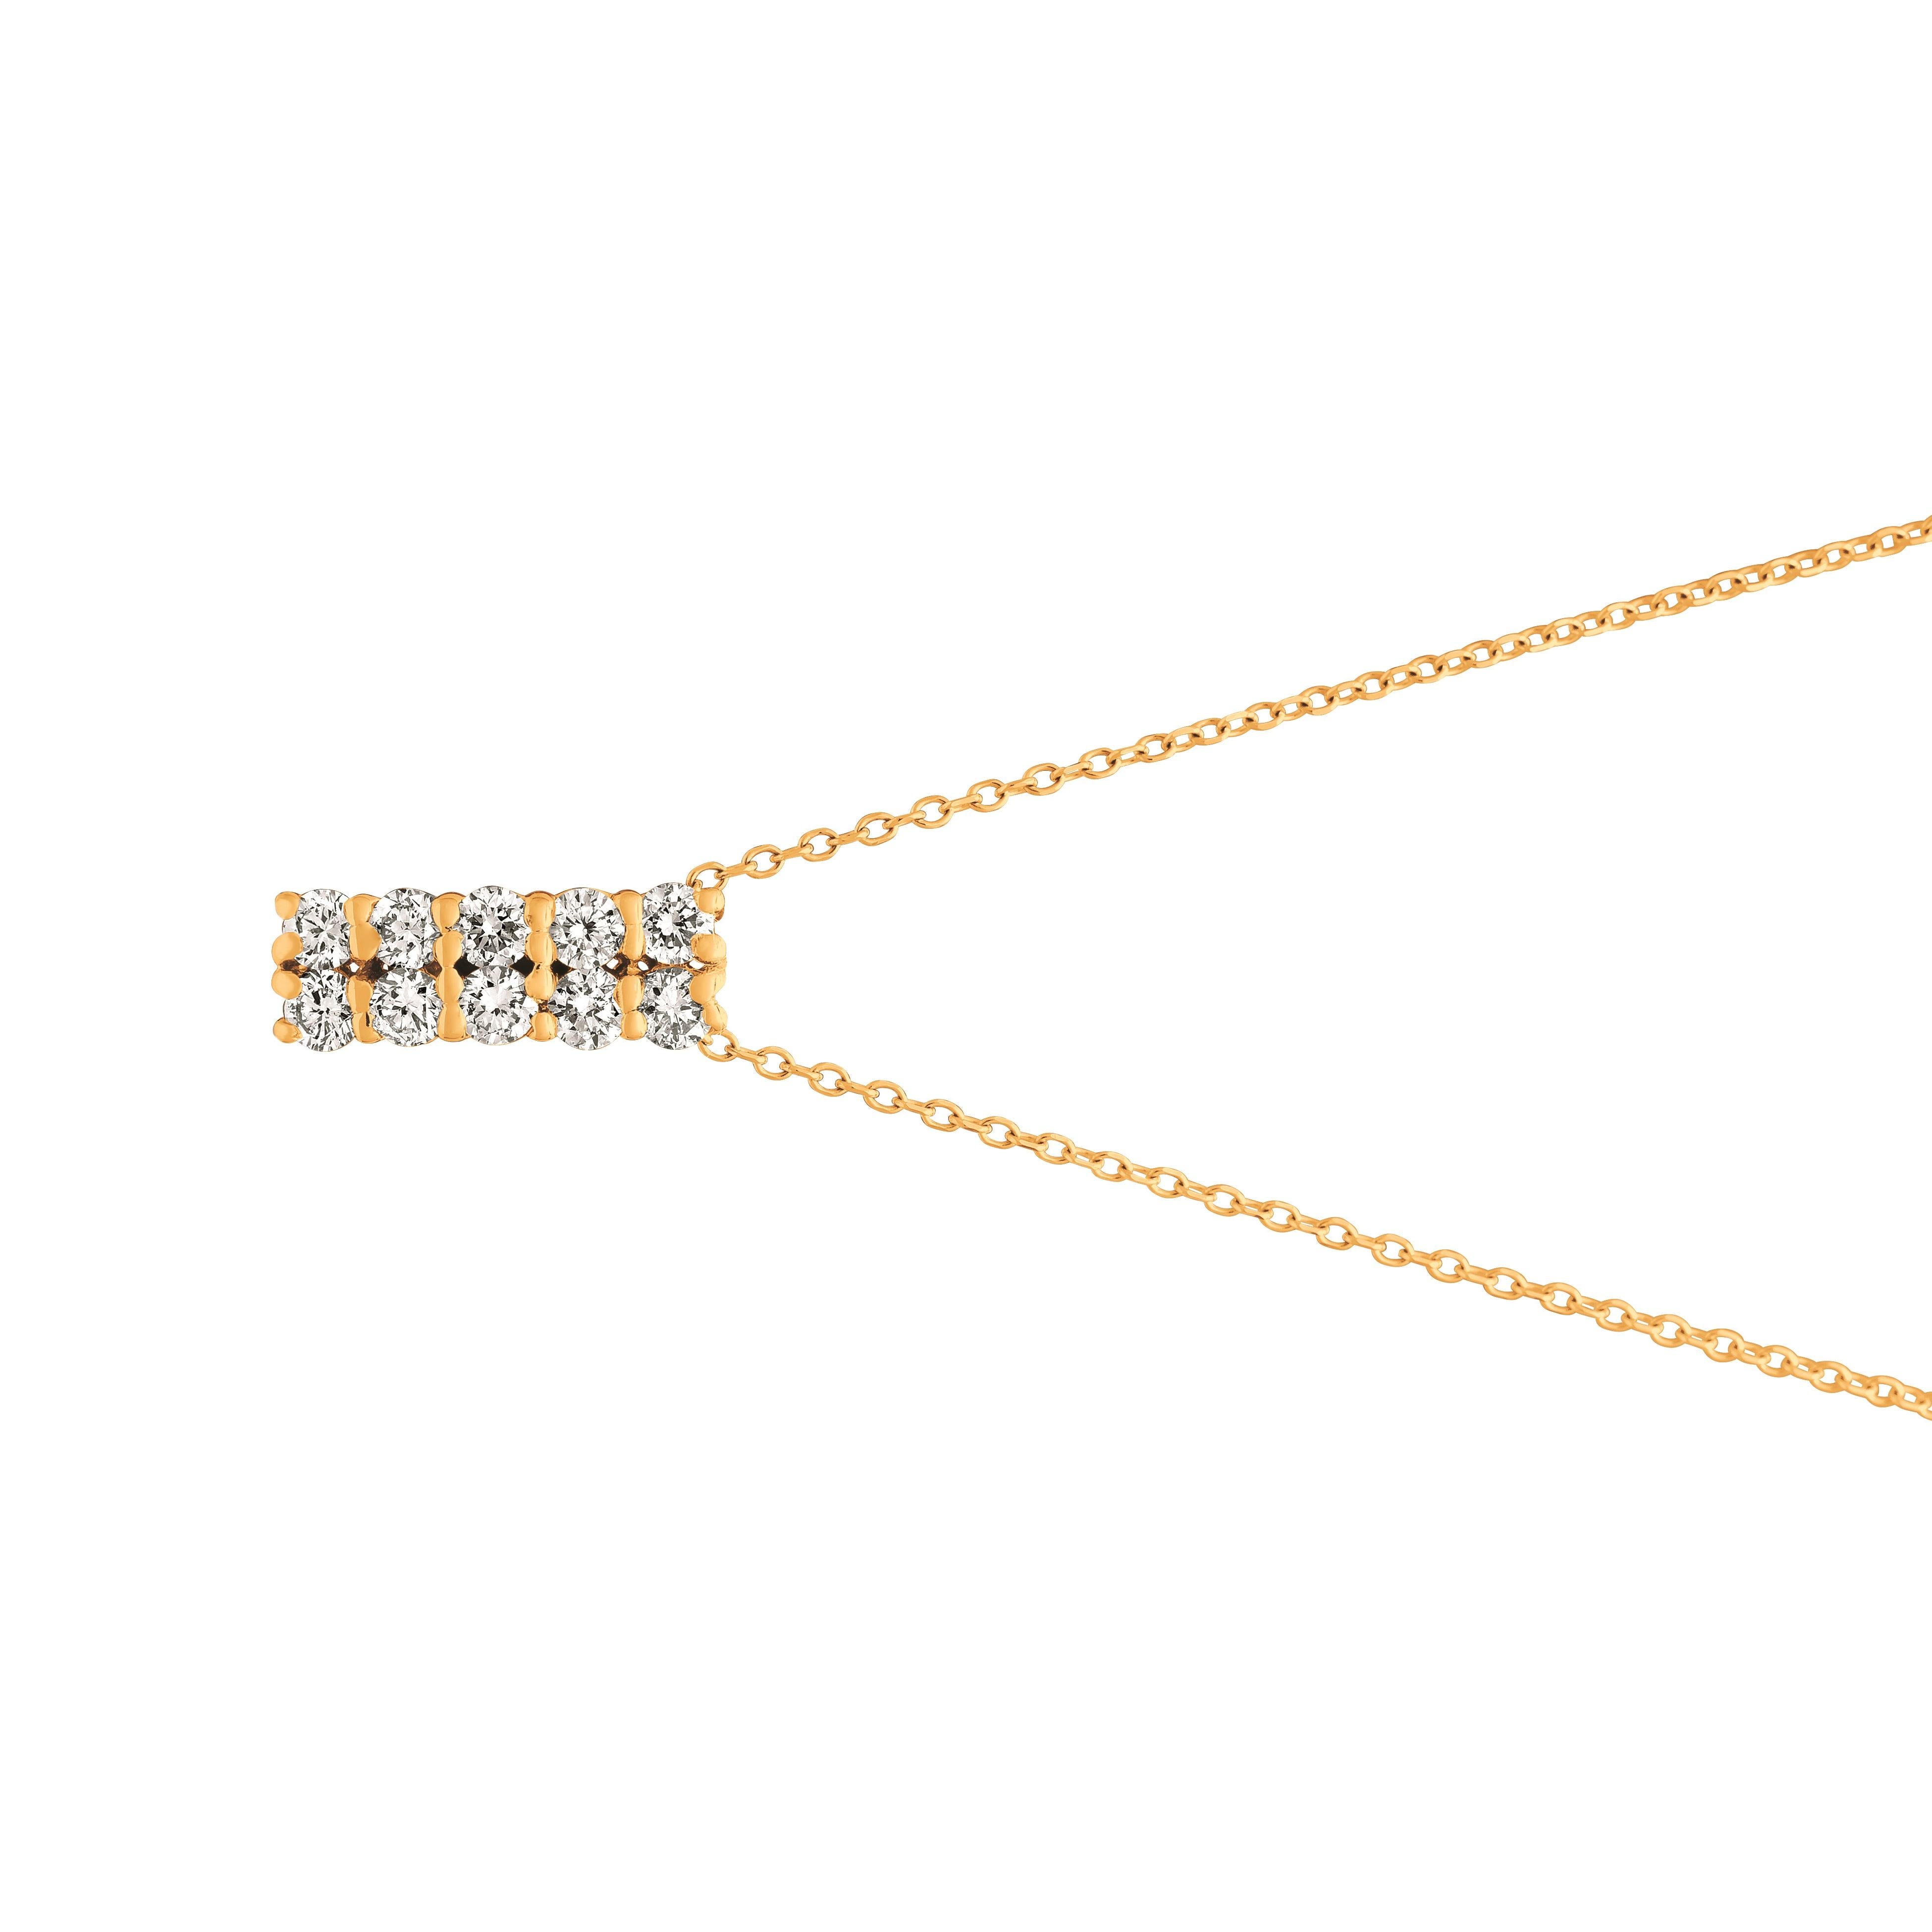 0.51 Carat Natural Diamond 2 Rows Necklace 14K Yellow Gold G SI 18 inches chain

100% Natural Diamonds, Not Enhanced in any way Round Cut Diamond Necklace
0.51CT
G-H
SI
14K Yellow Gold, Prong style , 2.2 grams
1/2 inch in height, 3/16 inch in